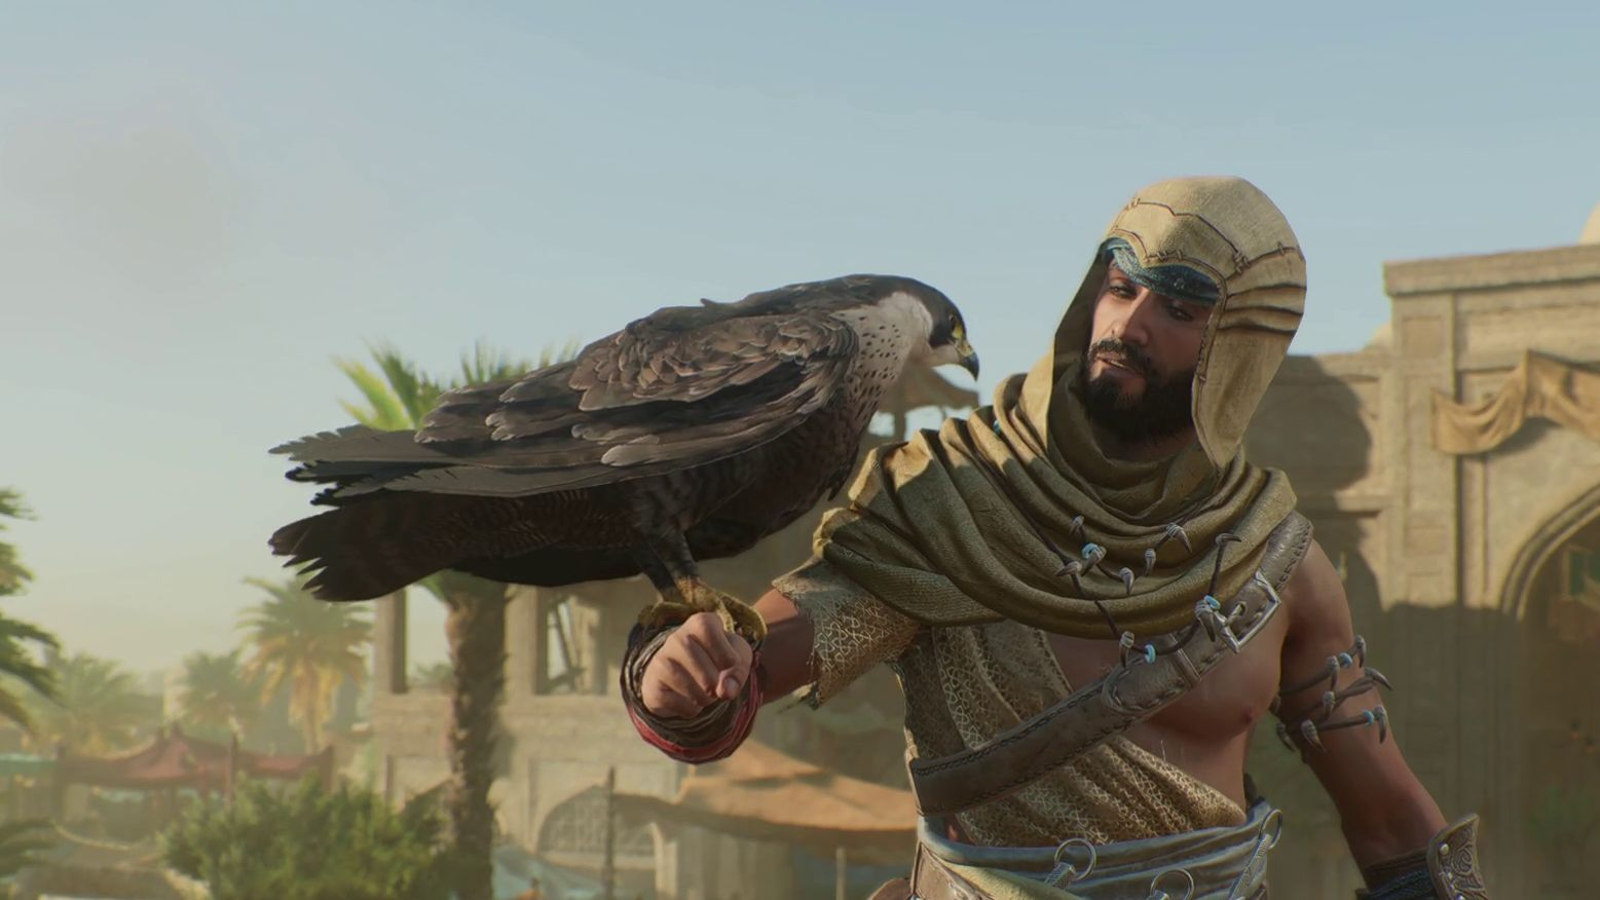 Assassin's Creed Mirage launch brings 18% player rise across AC